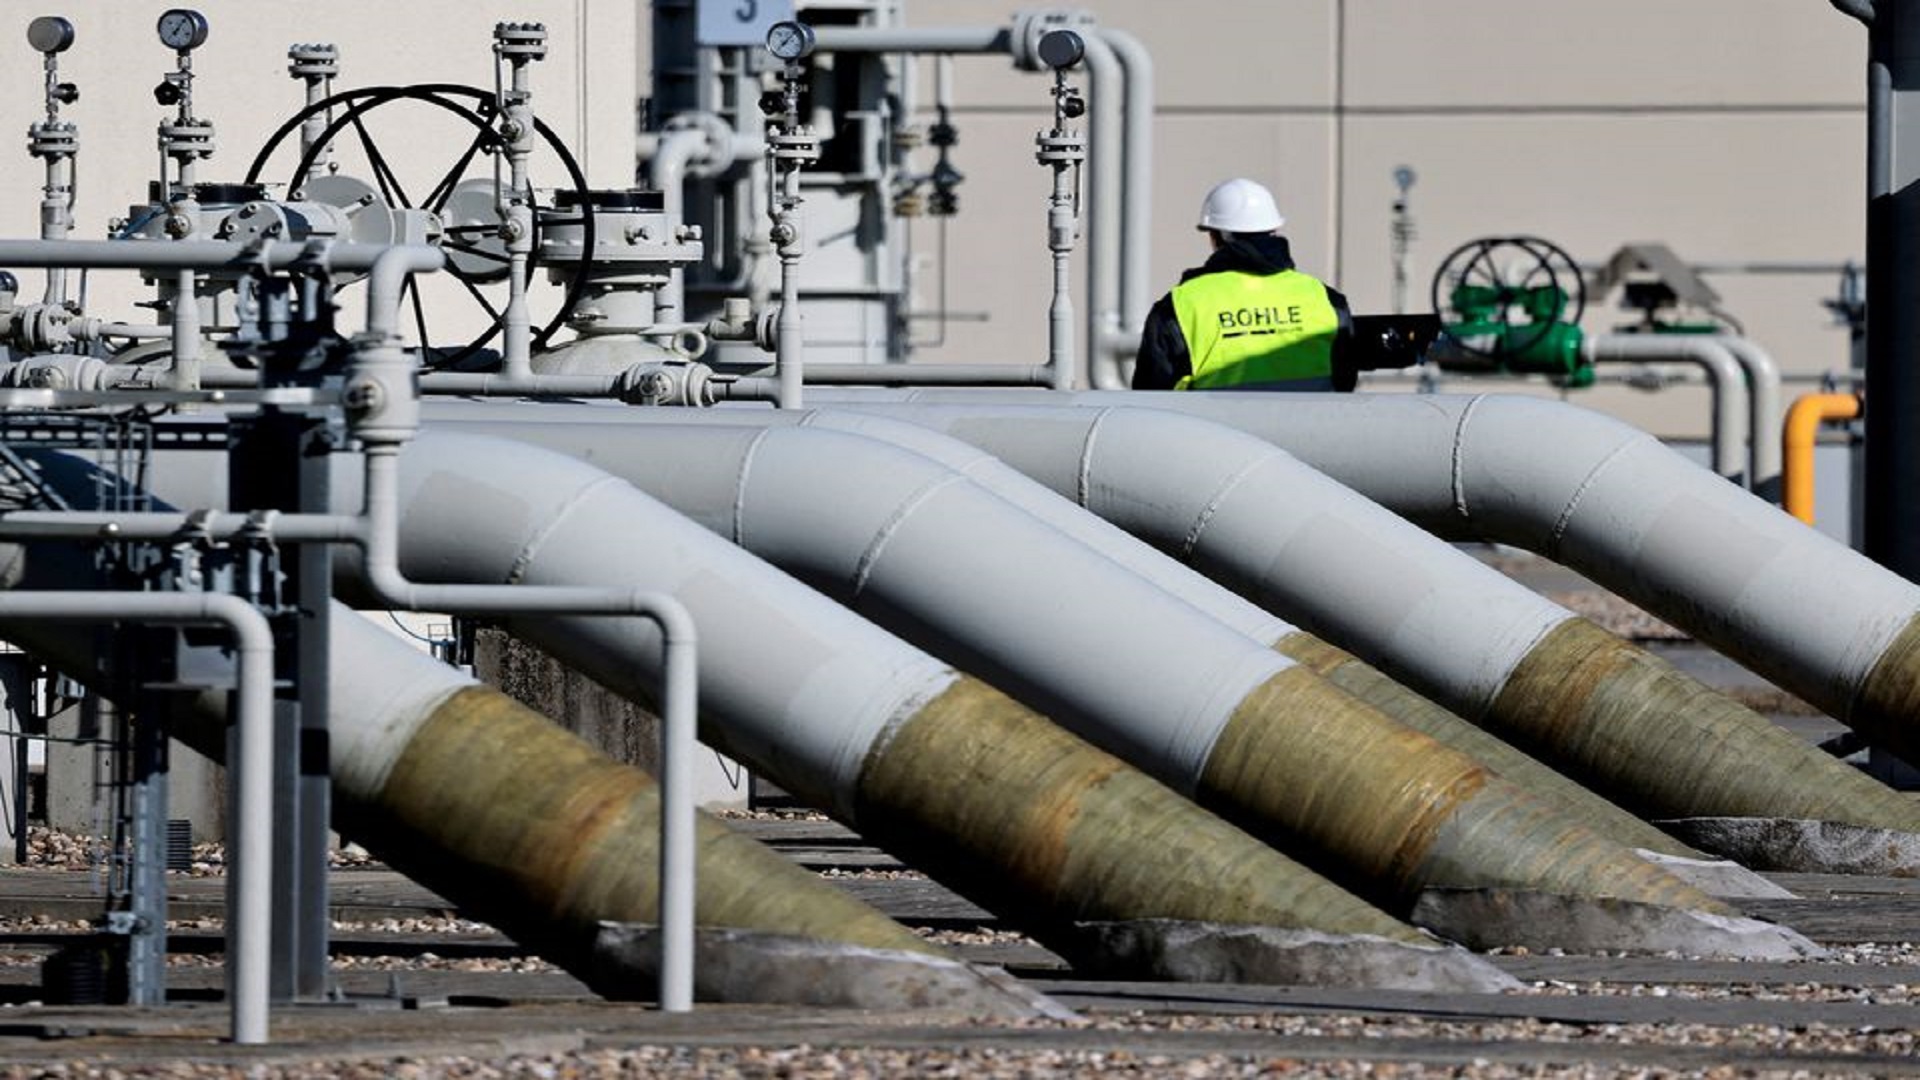 Pipes at the landfall facilities of the 'Nord Stream 1' gas pipeline are pictured in Lubmin, Germany, March 8, 2022. REUTERS/Hannibal Hanschke//File Photo